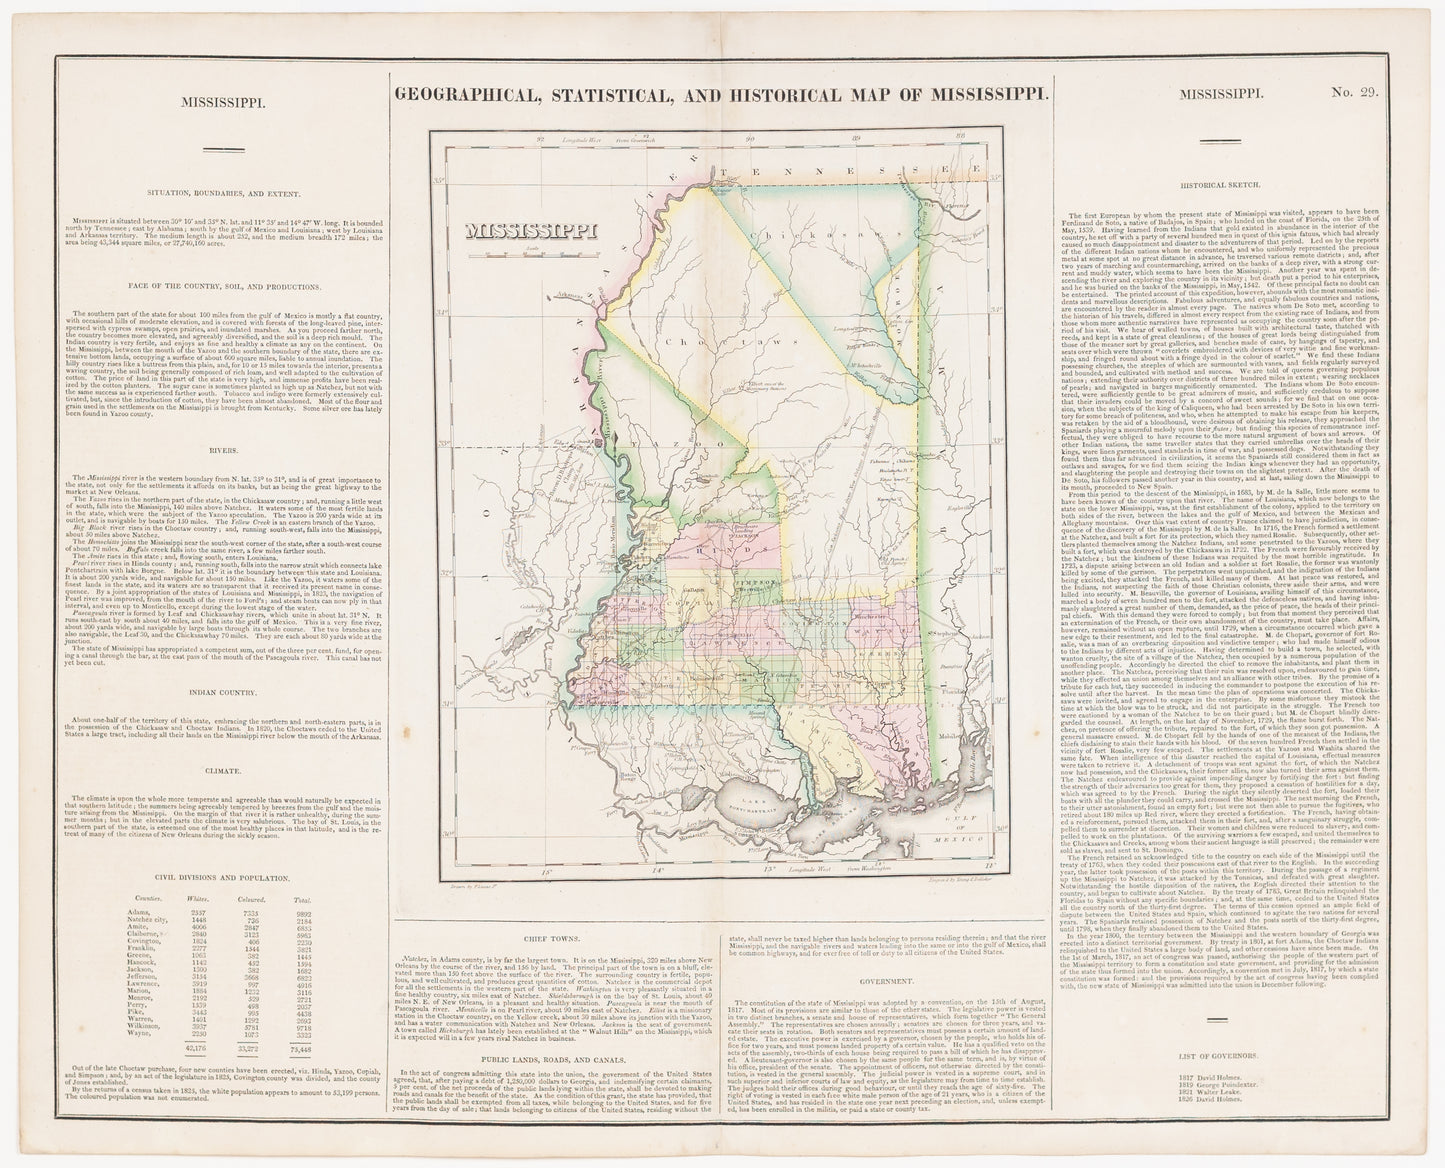 Carey, H.C. & Lea, I. Geographical, Statistical, and Historical Map of Mississippi. Philadelphia, 1827.